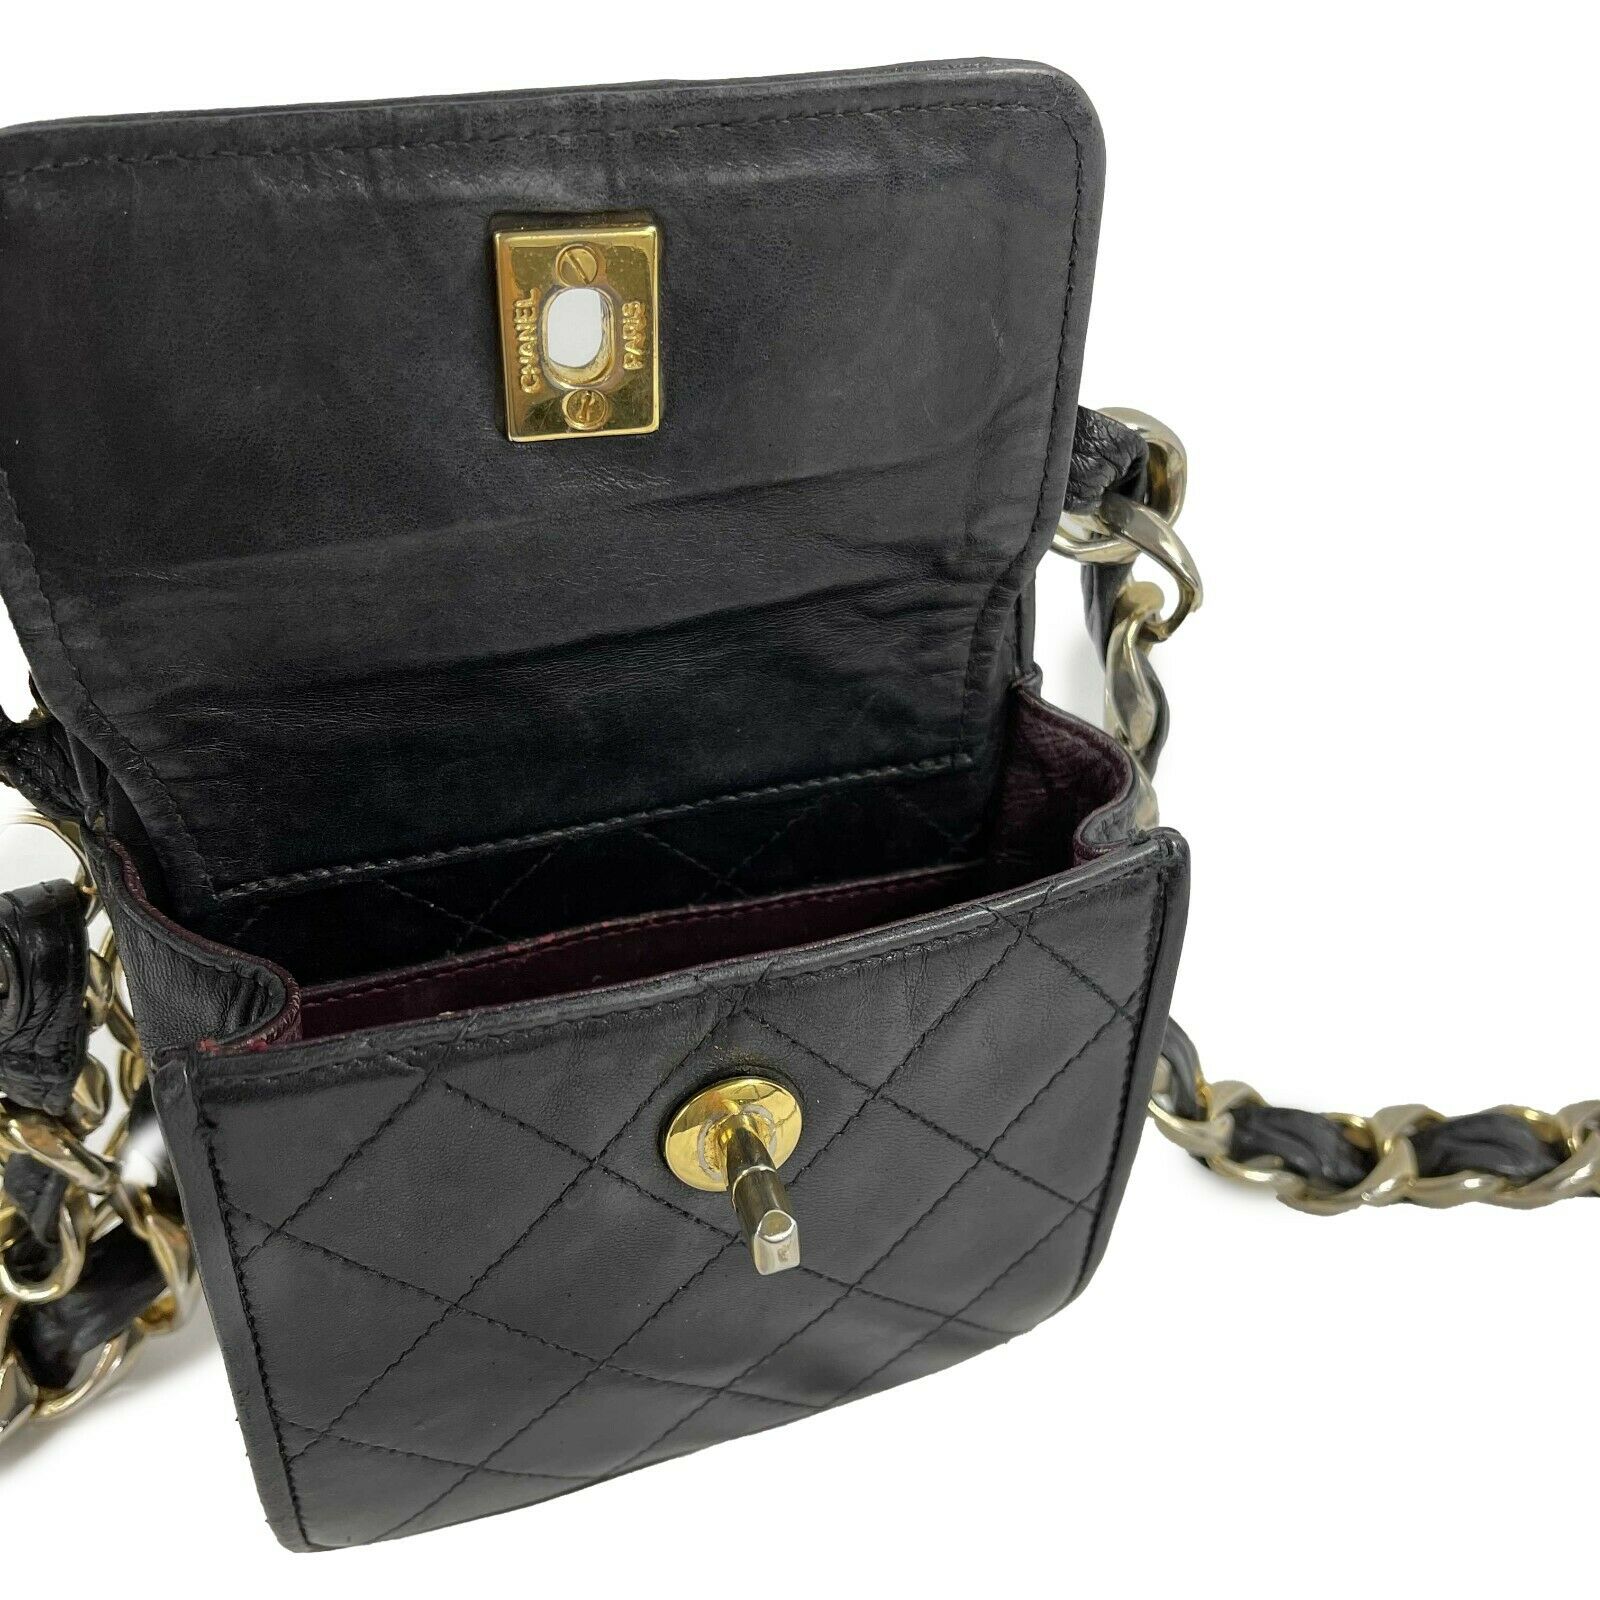 CHANEL - VTG 90s Black Quilted Leather CC Chain Belt Mini Bag / Fanny Pack